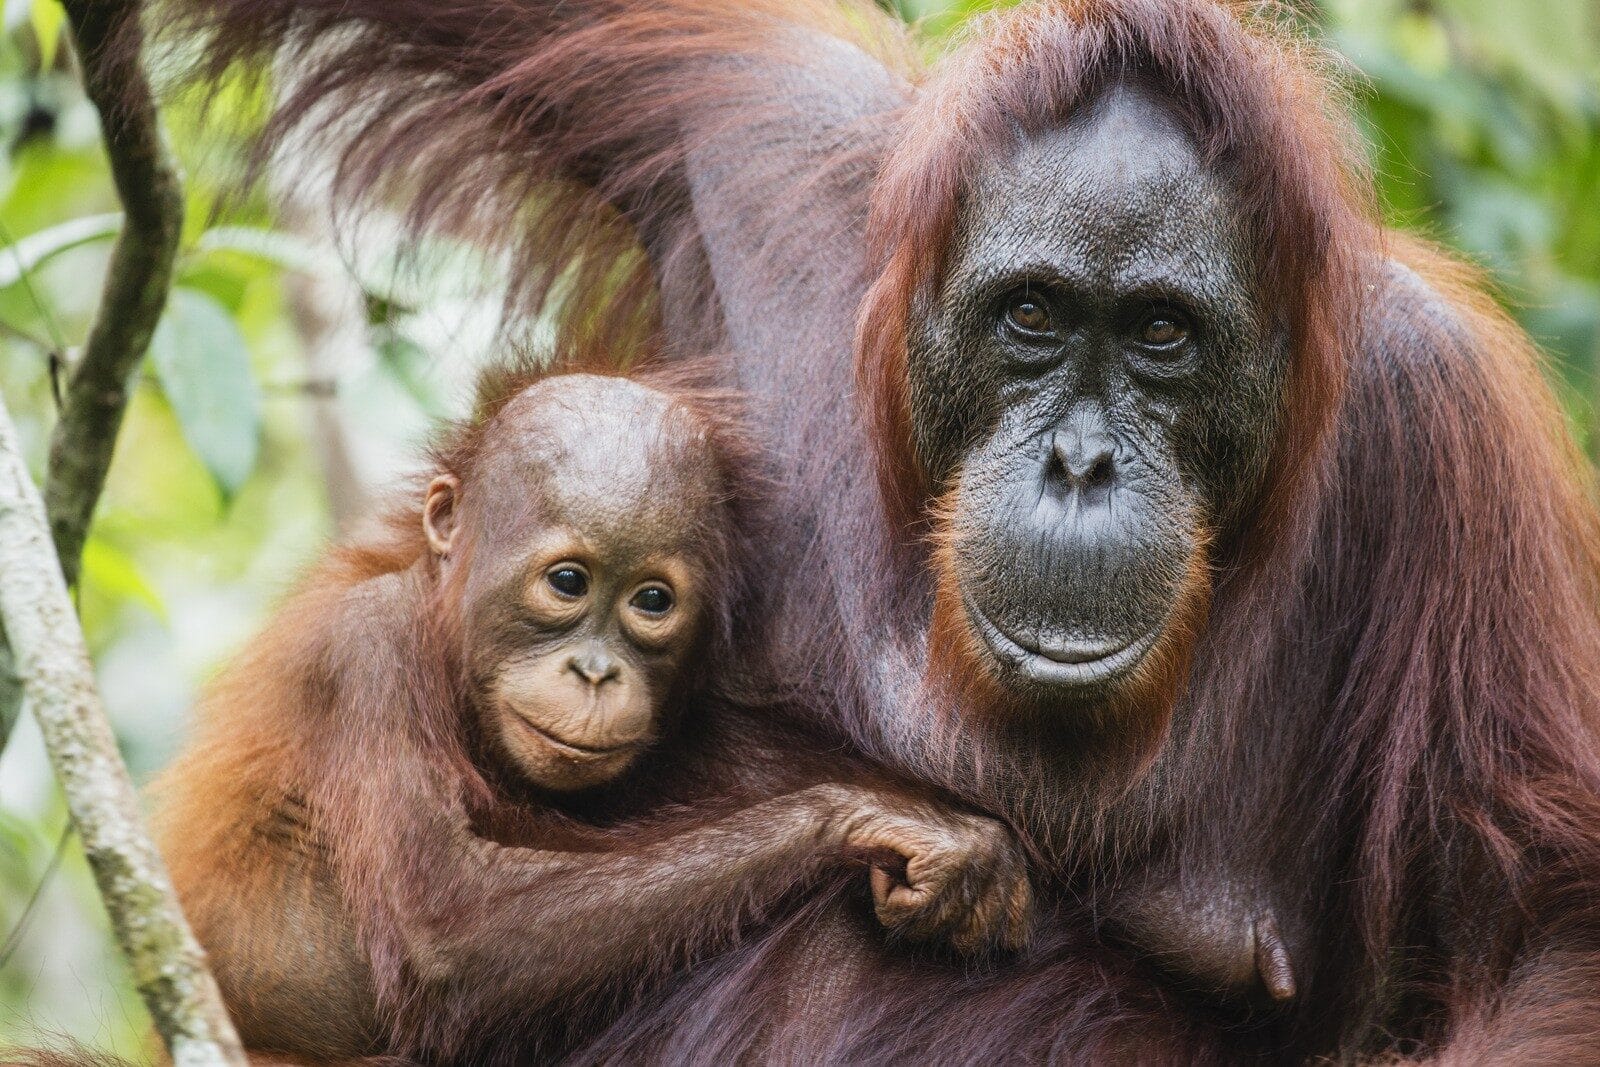 Image: A close-up portrait of orangutans, female (Pongo pymaeus) and her young together, Tanjung Puting National Park, Central Kalimantan, Borneo, Indonesia